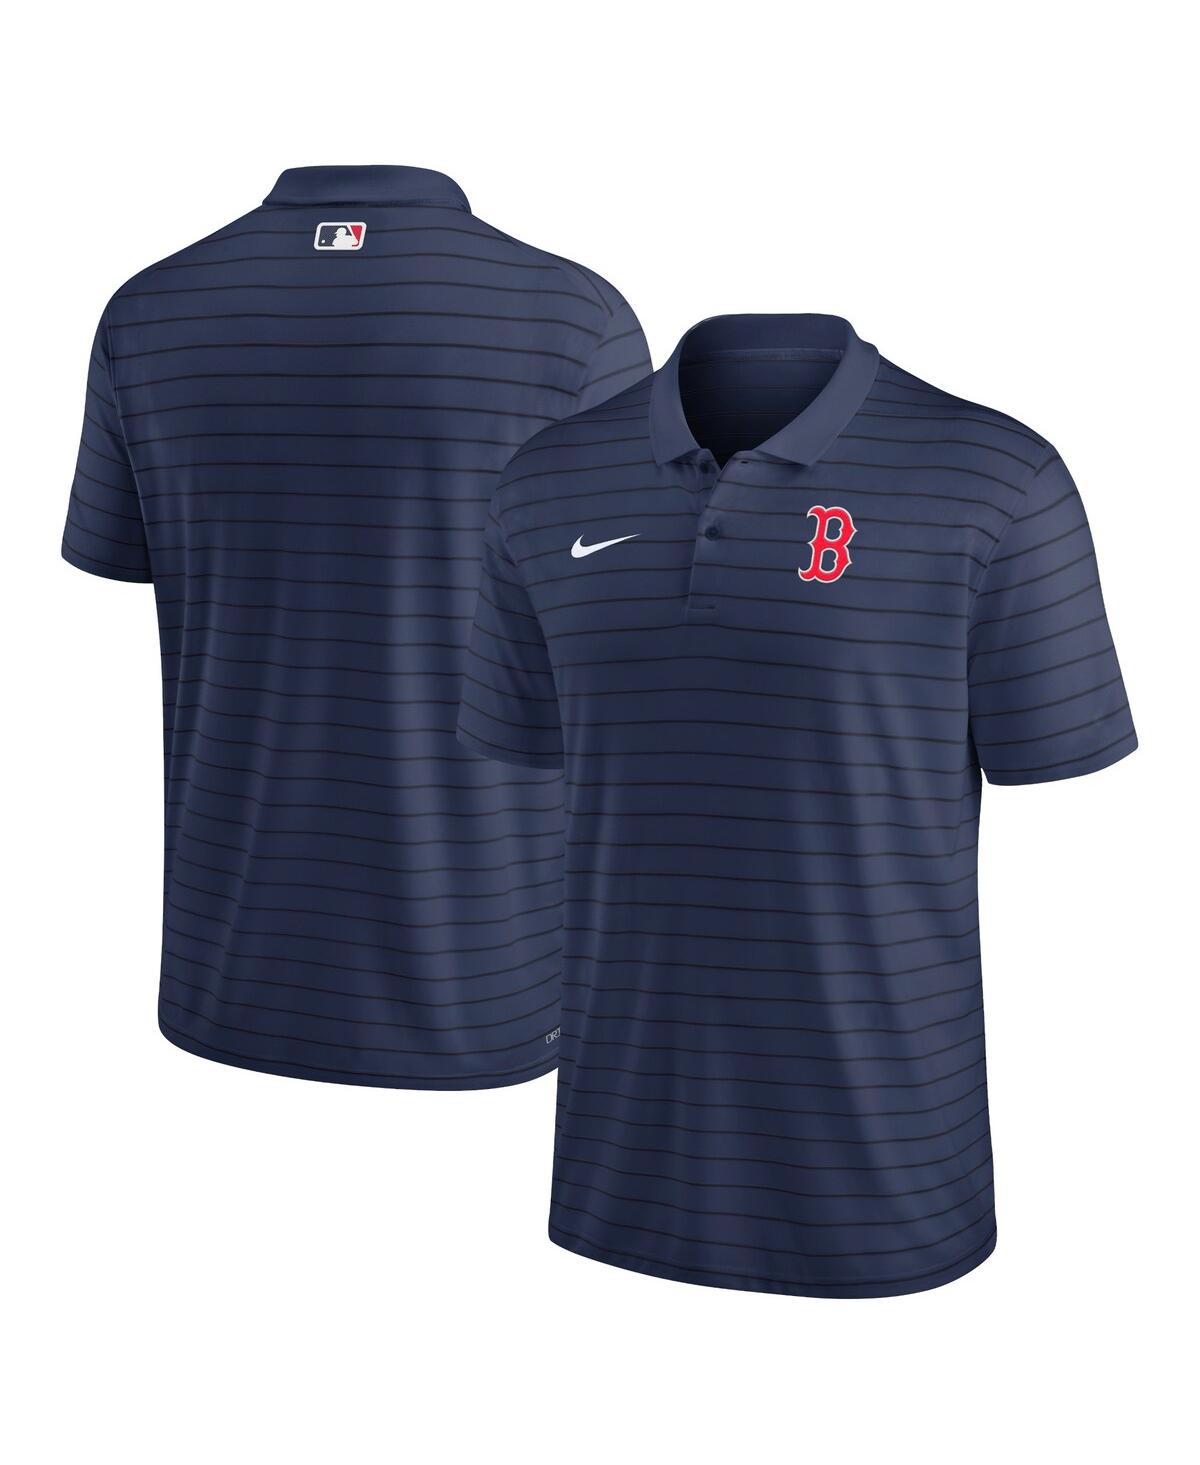 Shop Nike Men's  Navy Boston Red Sox Authentic Collection Victory Striped Performance Polo Shirt